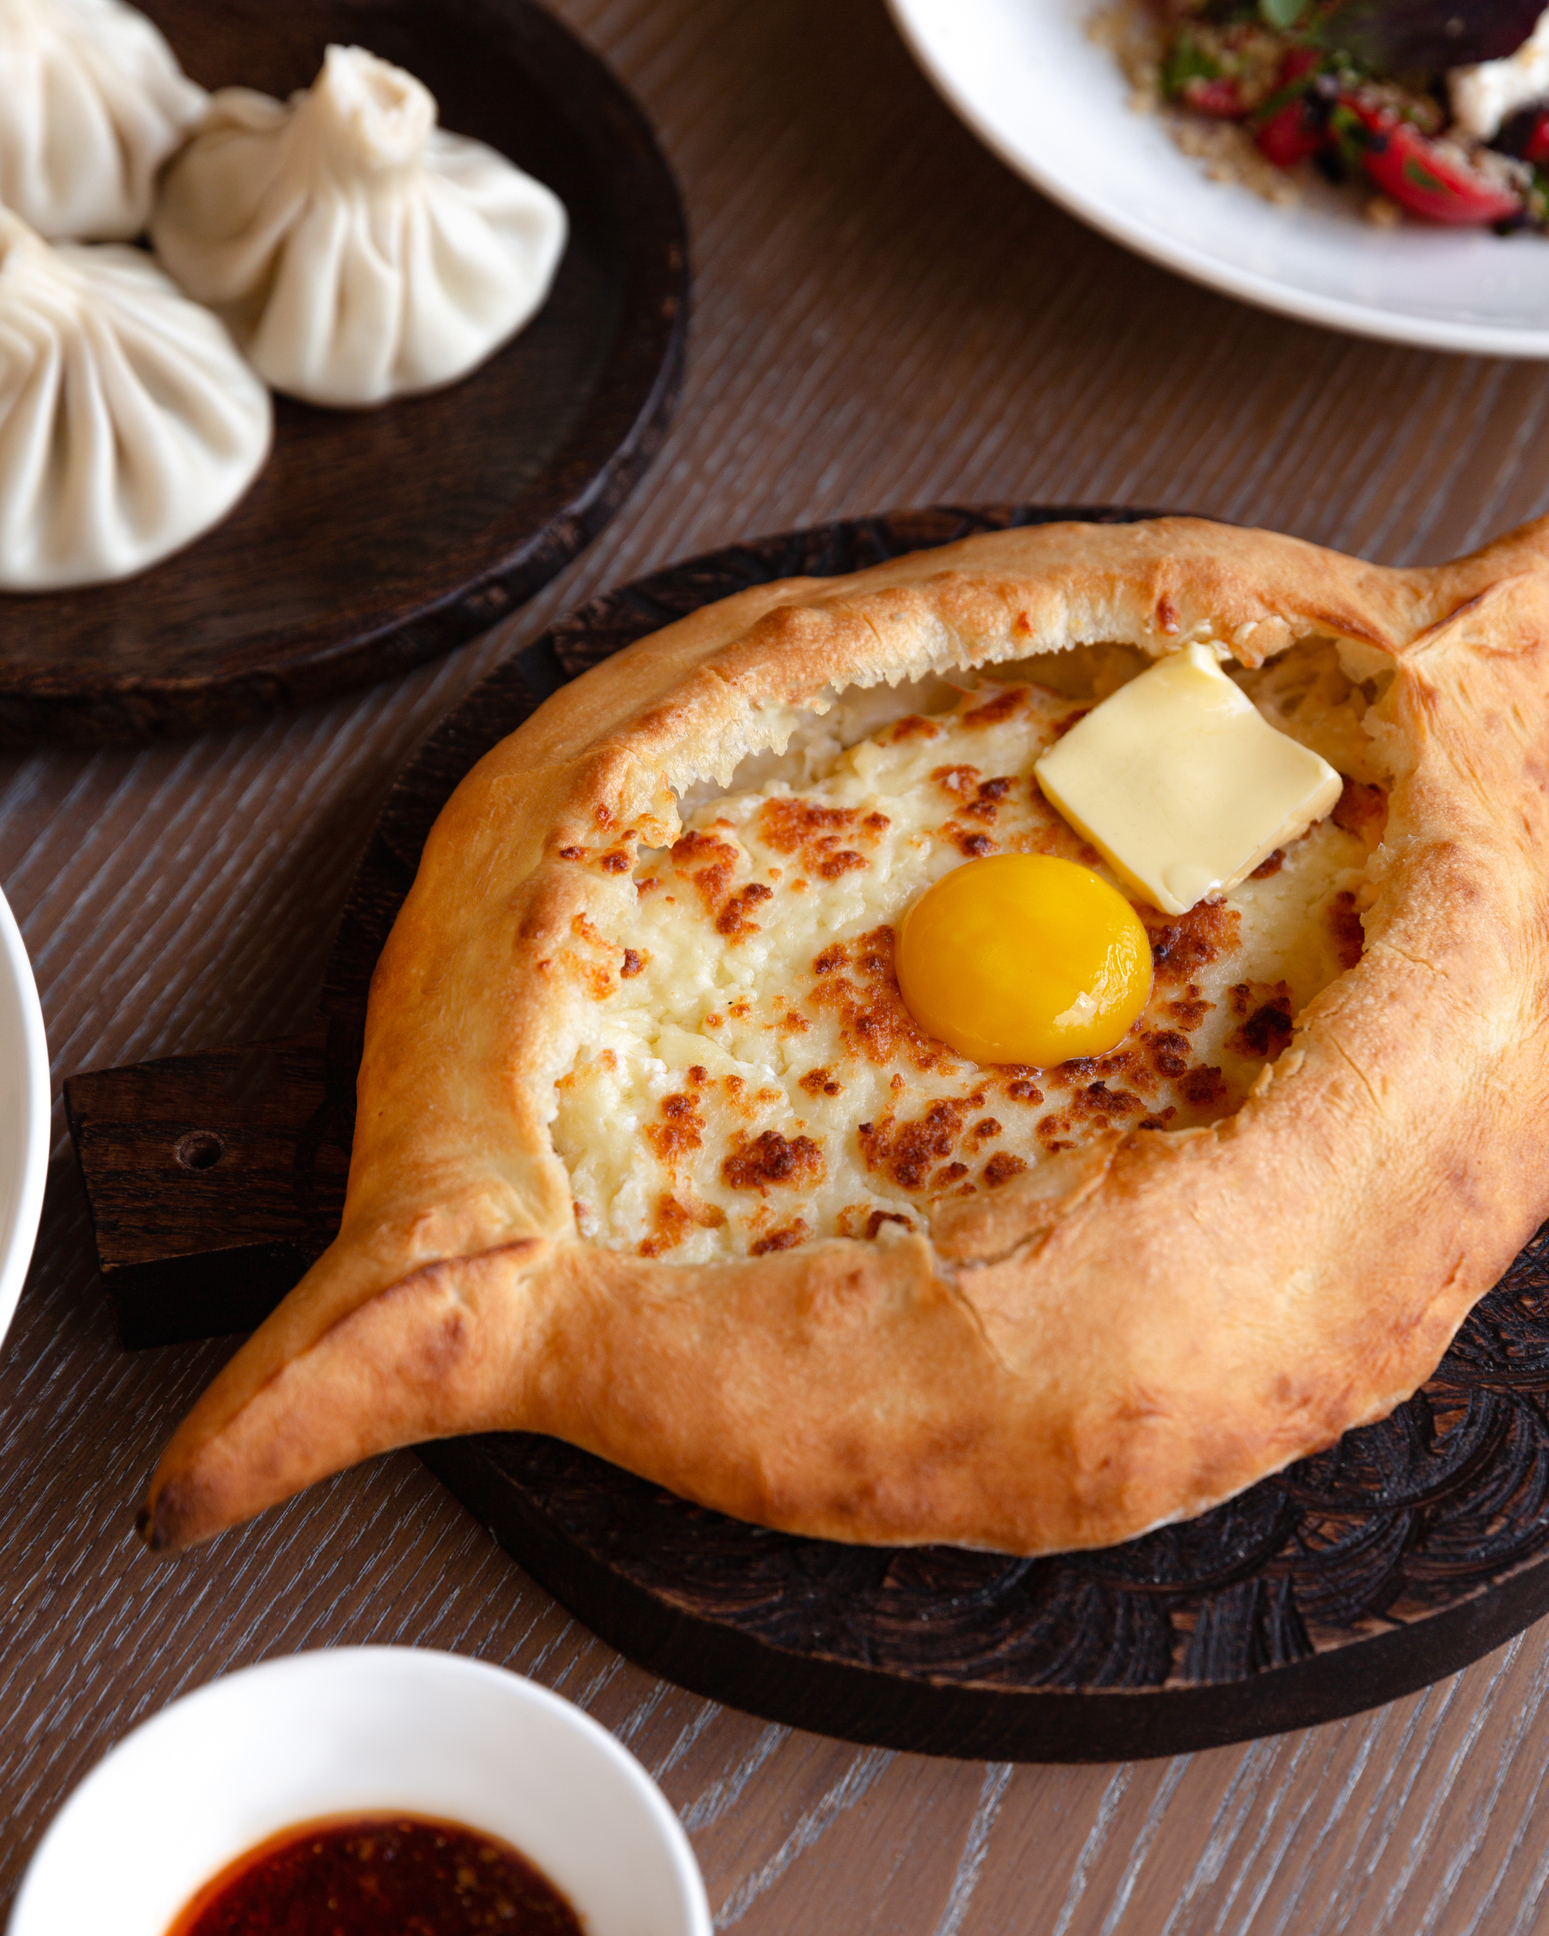 Georgian Khachapuri: bread boat with melted cheese, butter pat, raw egg on top, side of dumplings